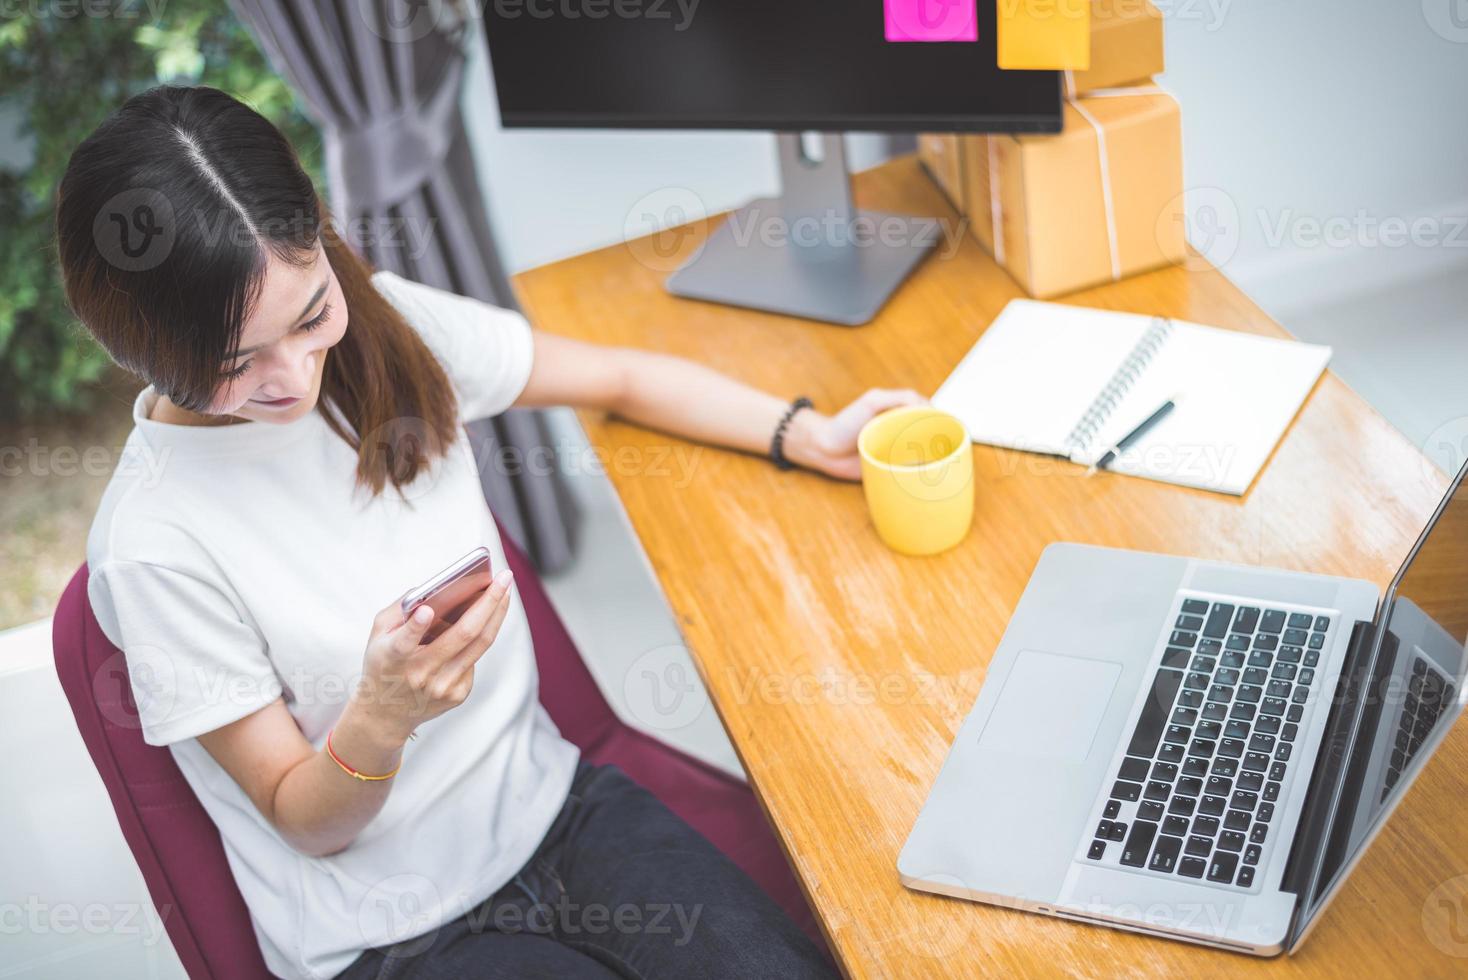 Top view of woman using mobile phone and laptop as shopping photo